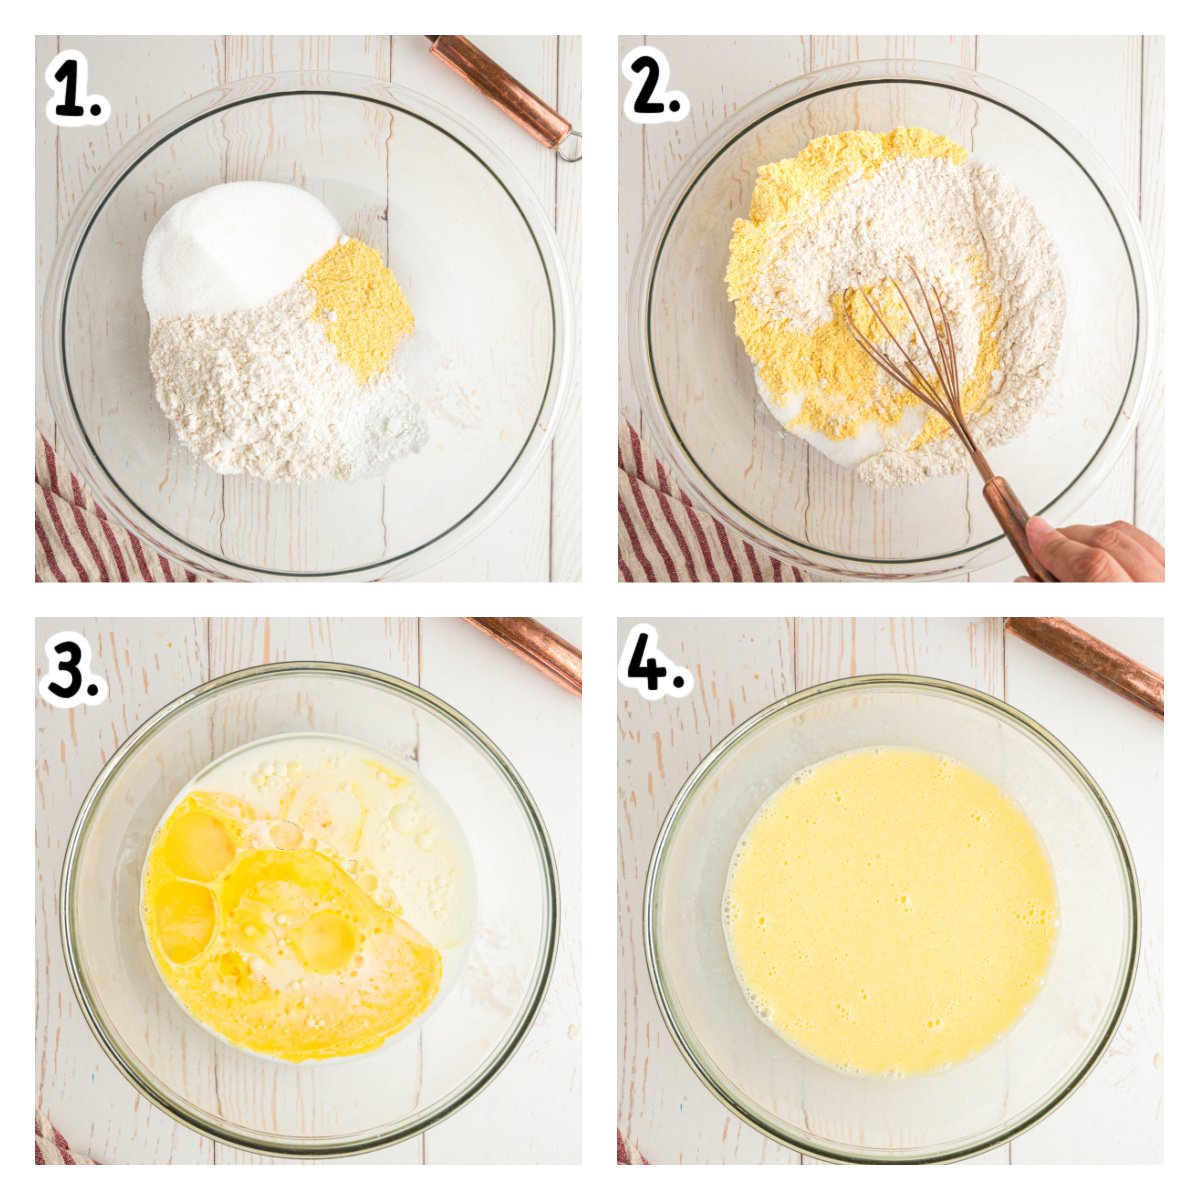 Four images showing how to make the batter for cornbread.